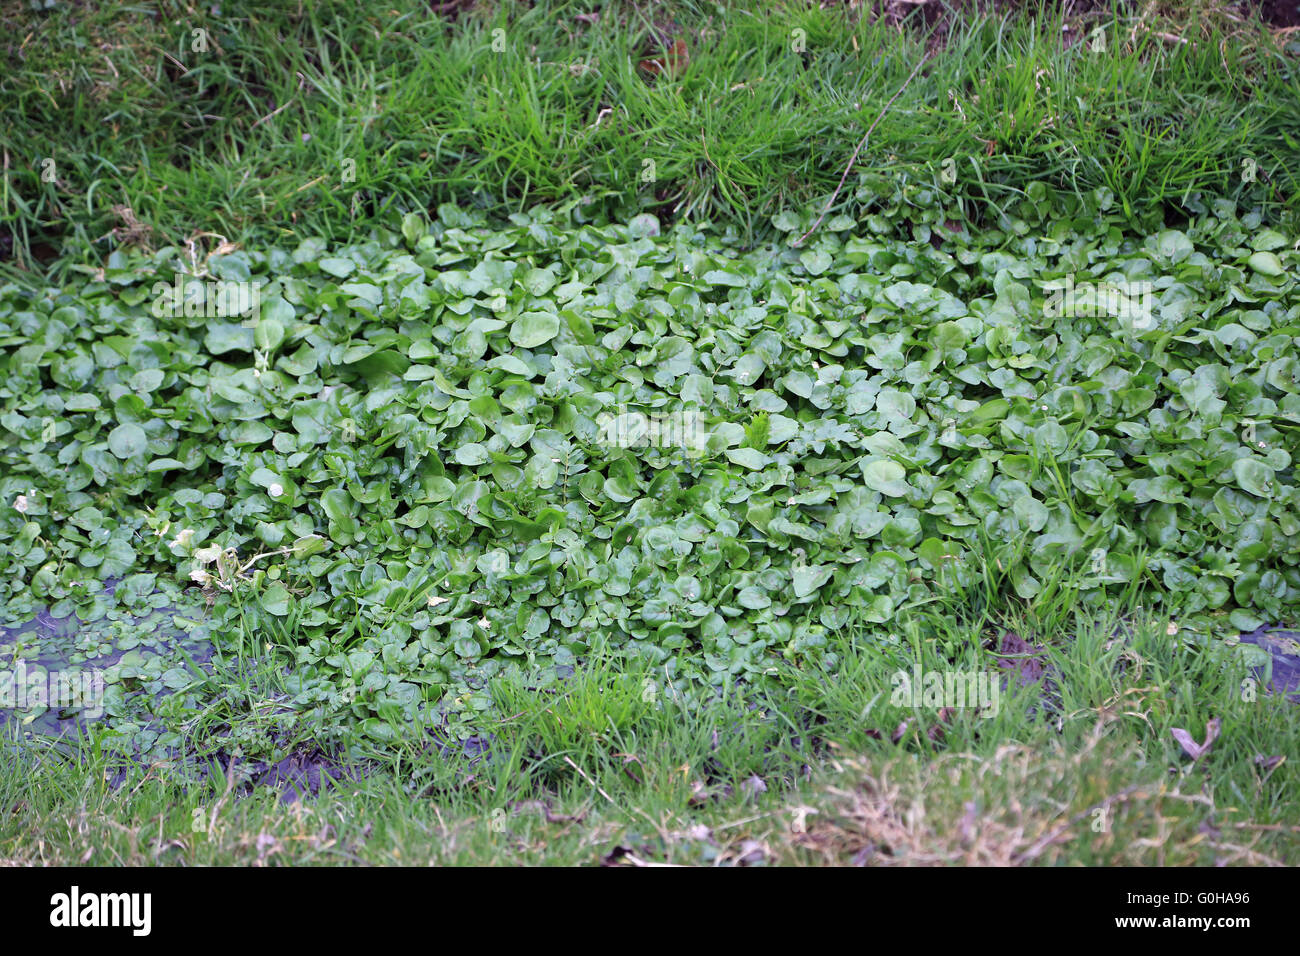 Moat with water plants and hydrophyte Stock Photo